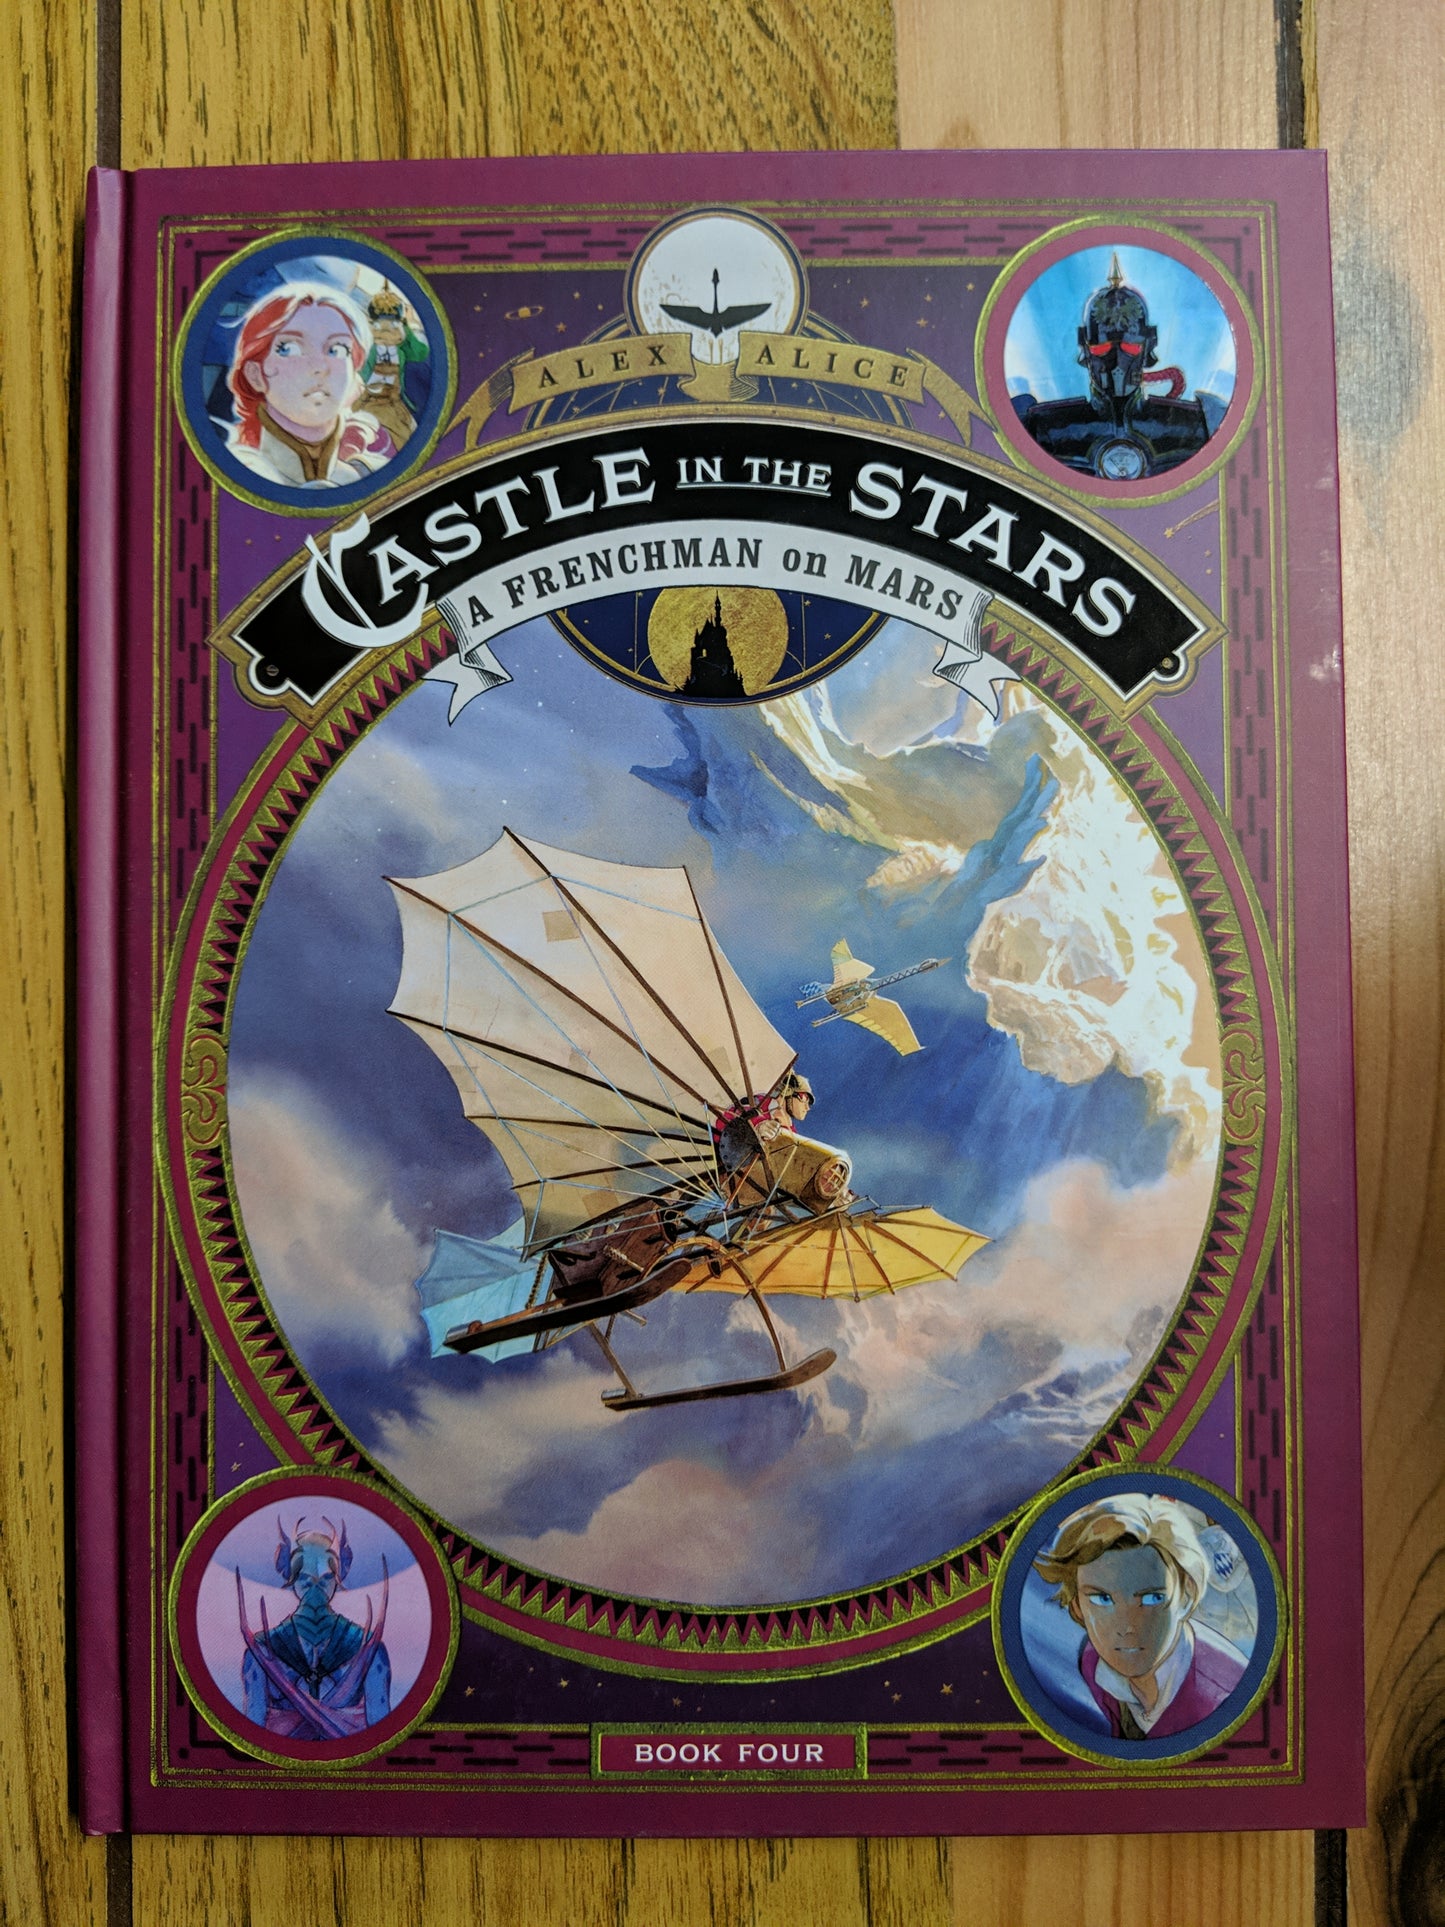 Castle in the Stars: A Frenchman on Mars (Vol 4)